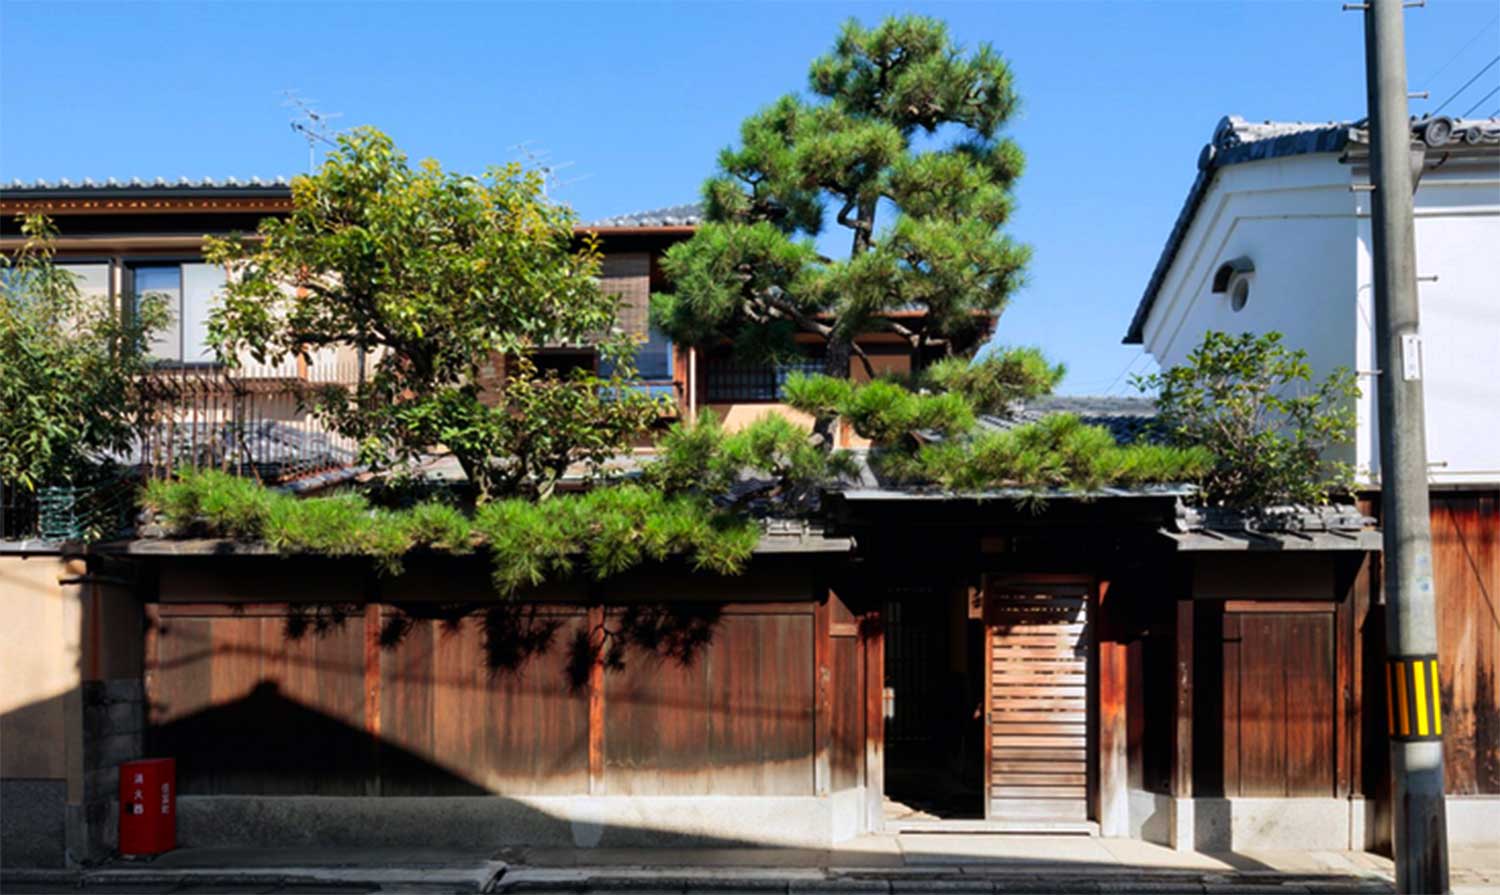 Combination of Modern and Traditional House In Japanese Style - My